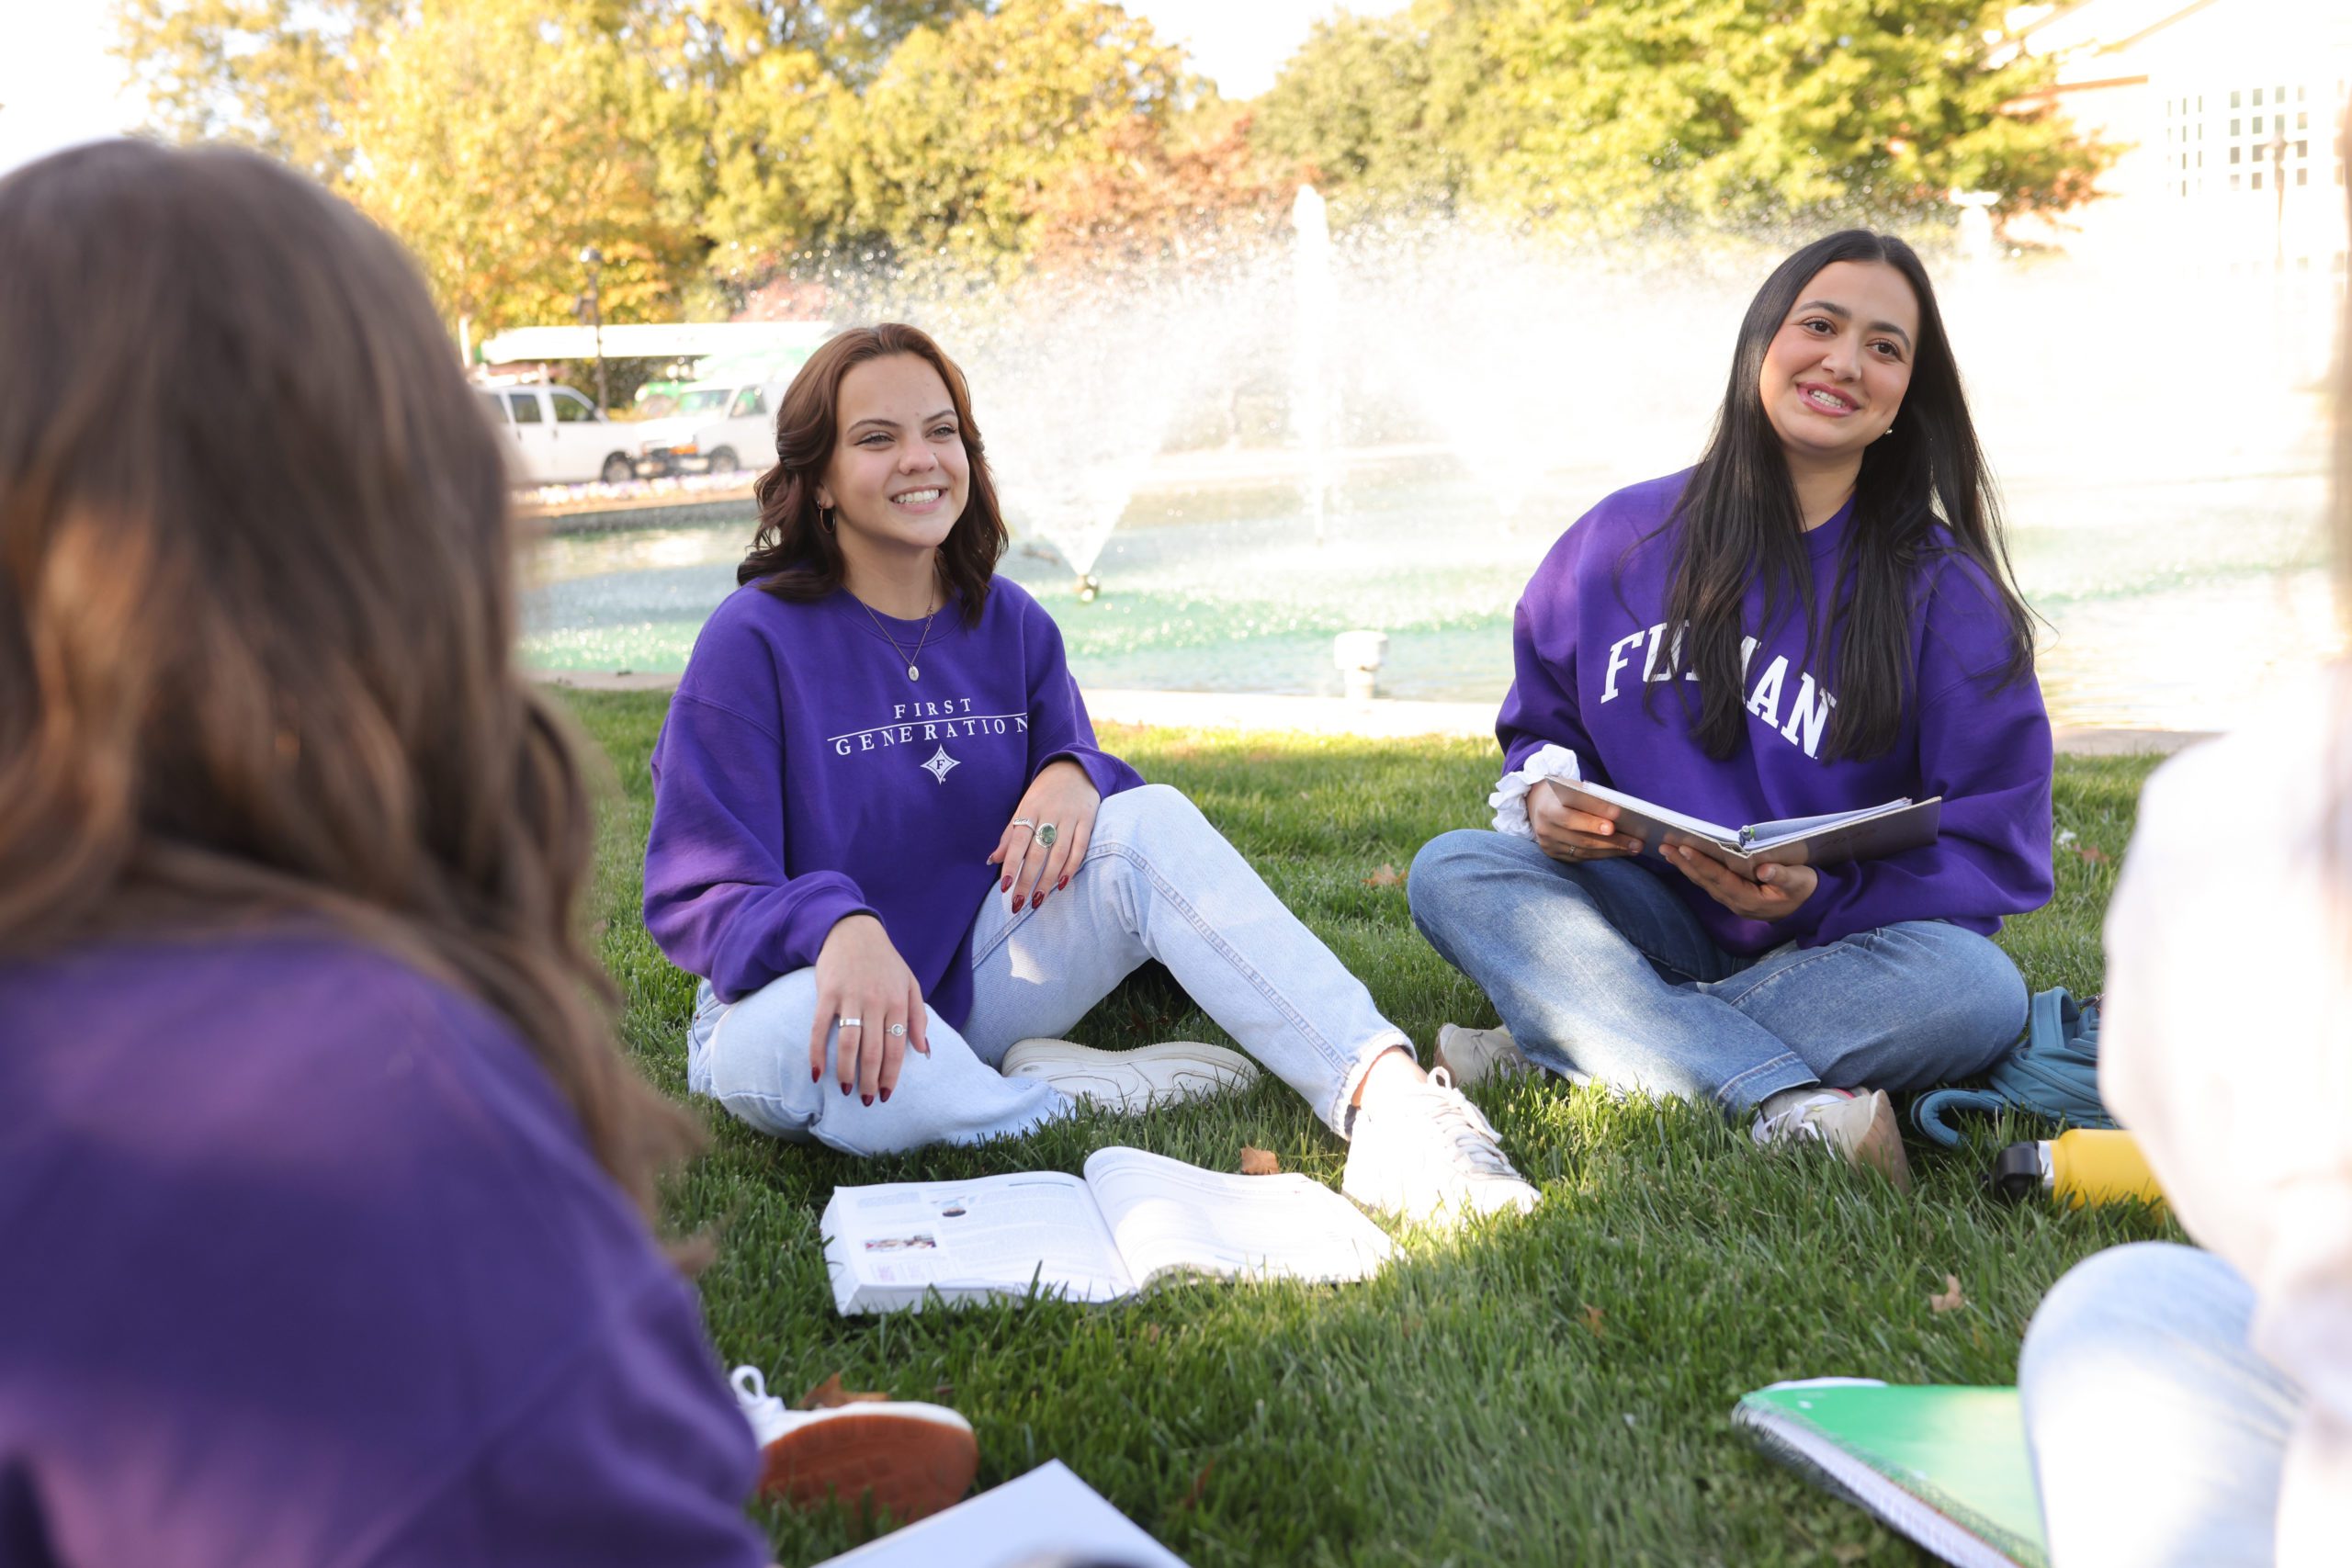 Female students laughing together and sitting in the grass in front of a water fountain on campus